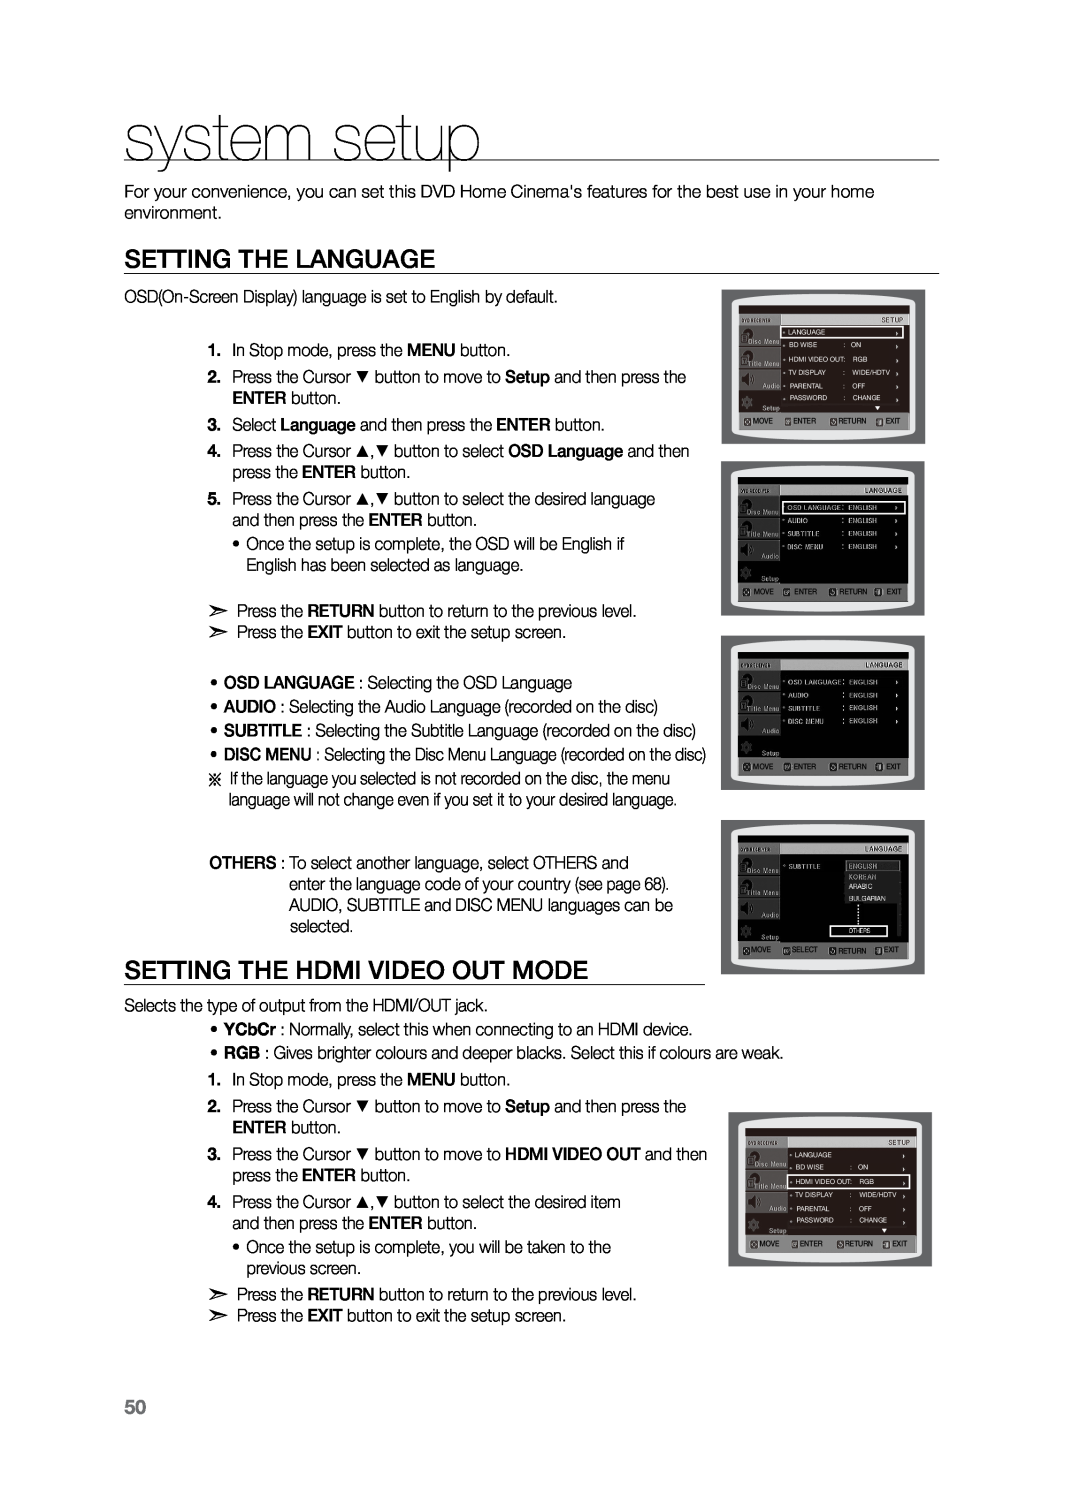 Samsung HT-TZ325T/XSV, HT-Z220T/MEA, HT-TZ325T/SIM manual system setup, Setting the Language, Setting the HDMI VIDEO OUT MODE 